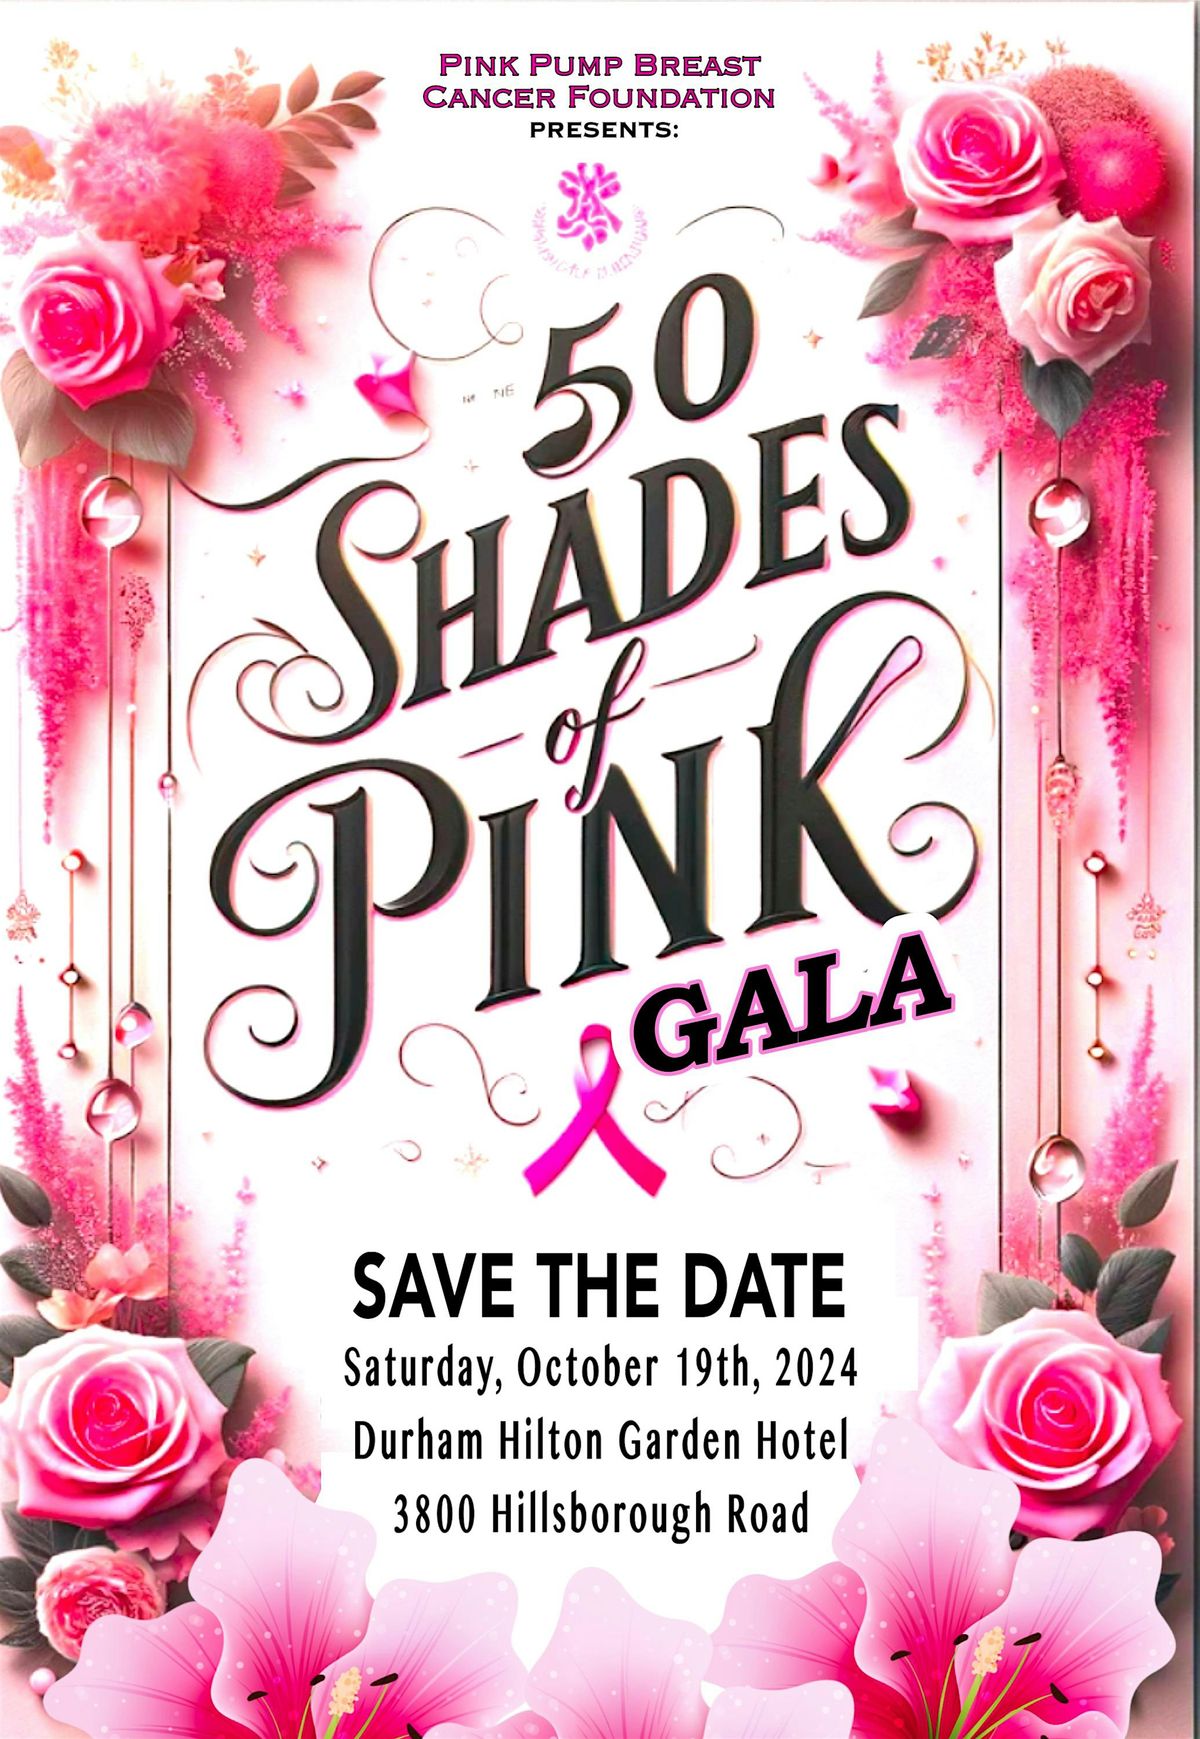 The Pink Pump Breast Cancer Foundation Presents The 50 Shades Of Pink Gala